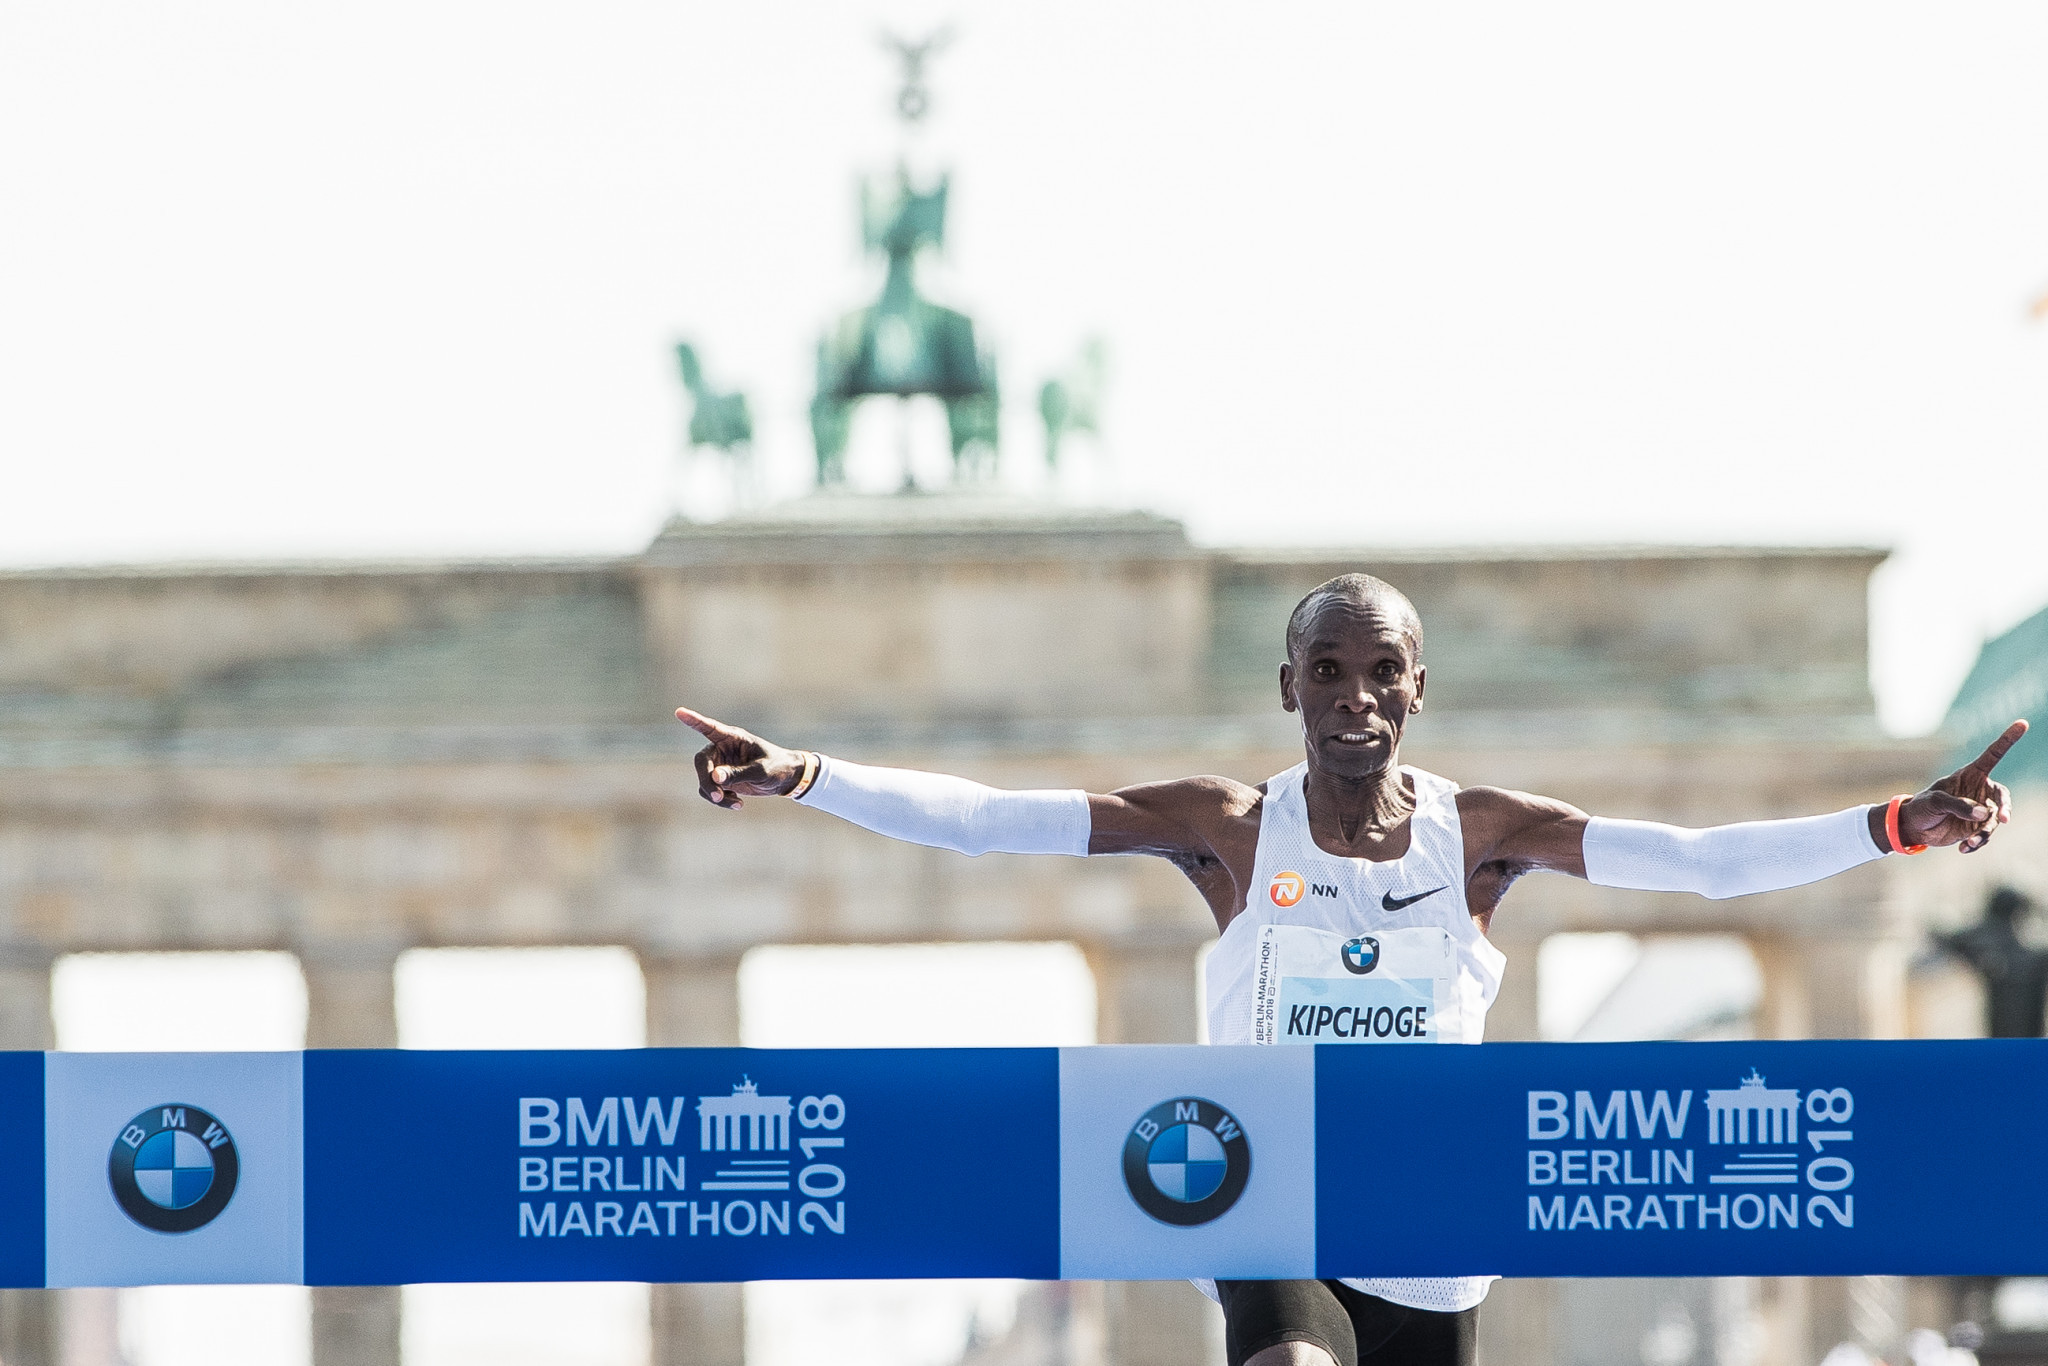 Berlin Marathon organisers yet to make a decision on fate of 2020 race